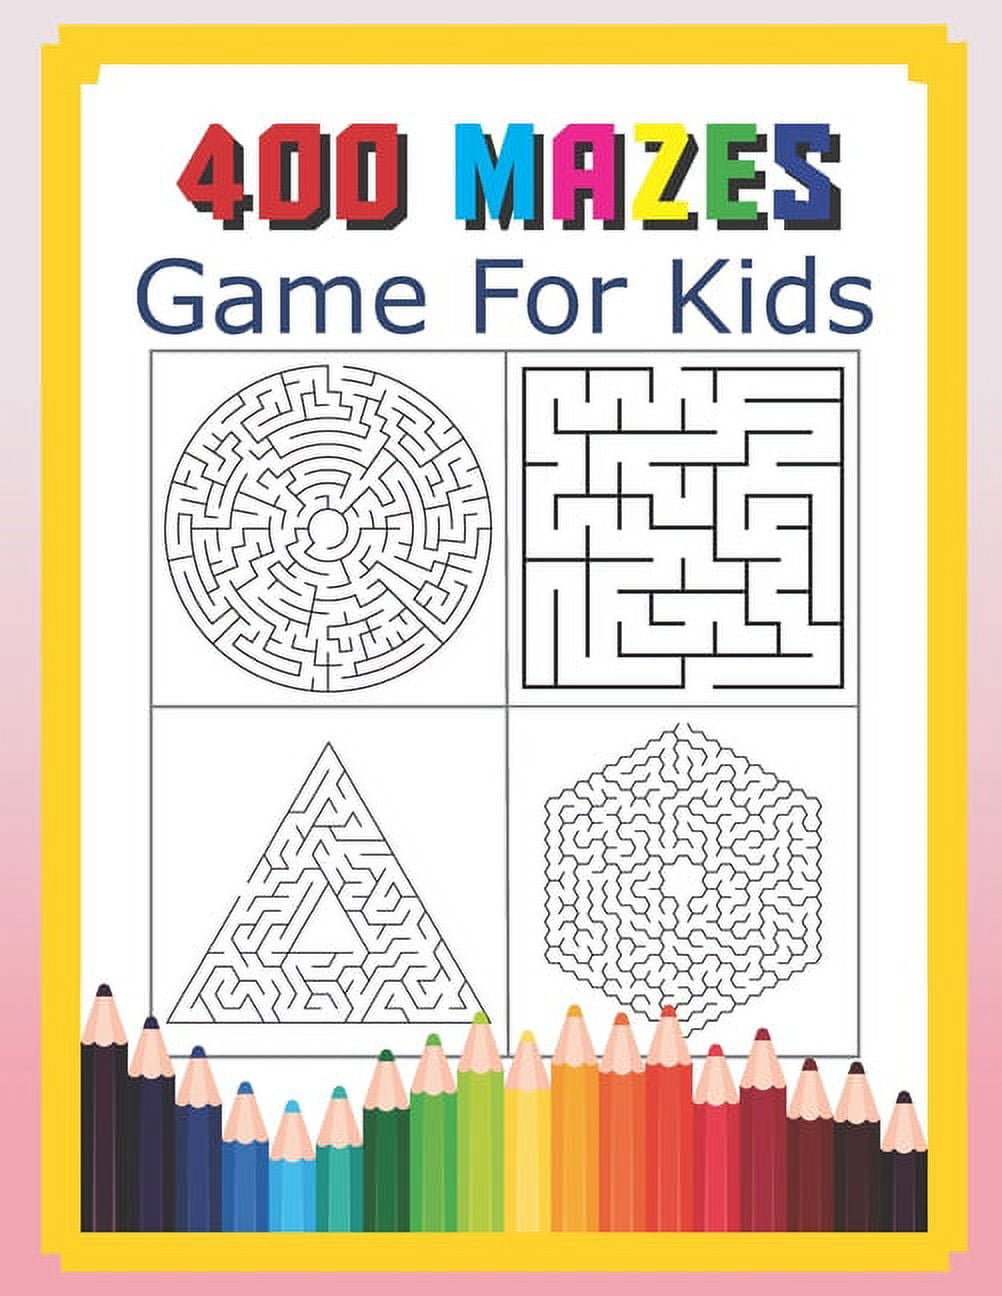 Brain Game Mazes For Kids Ages 4-6: Best maze workbook for kids. This maze  activity books for kids is perfect to keep kids brain sharp. Great for  skill development and problem solving